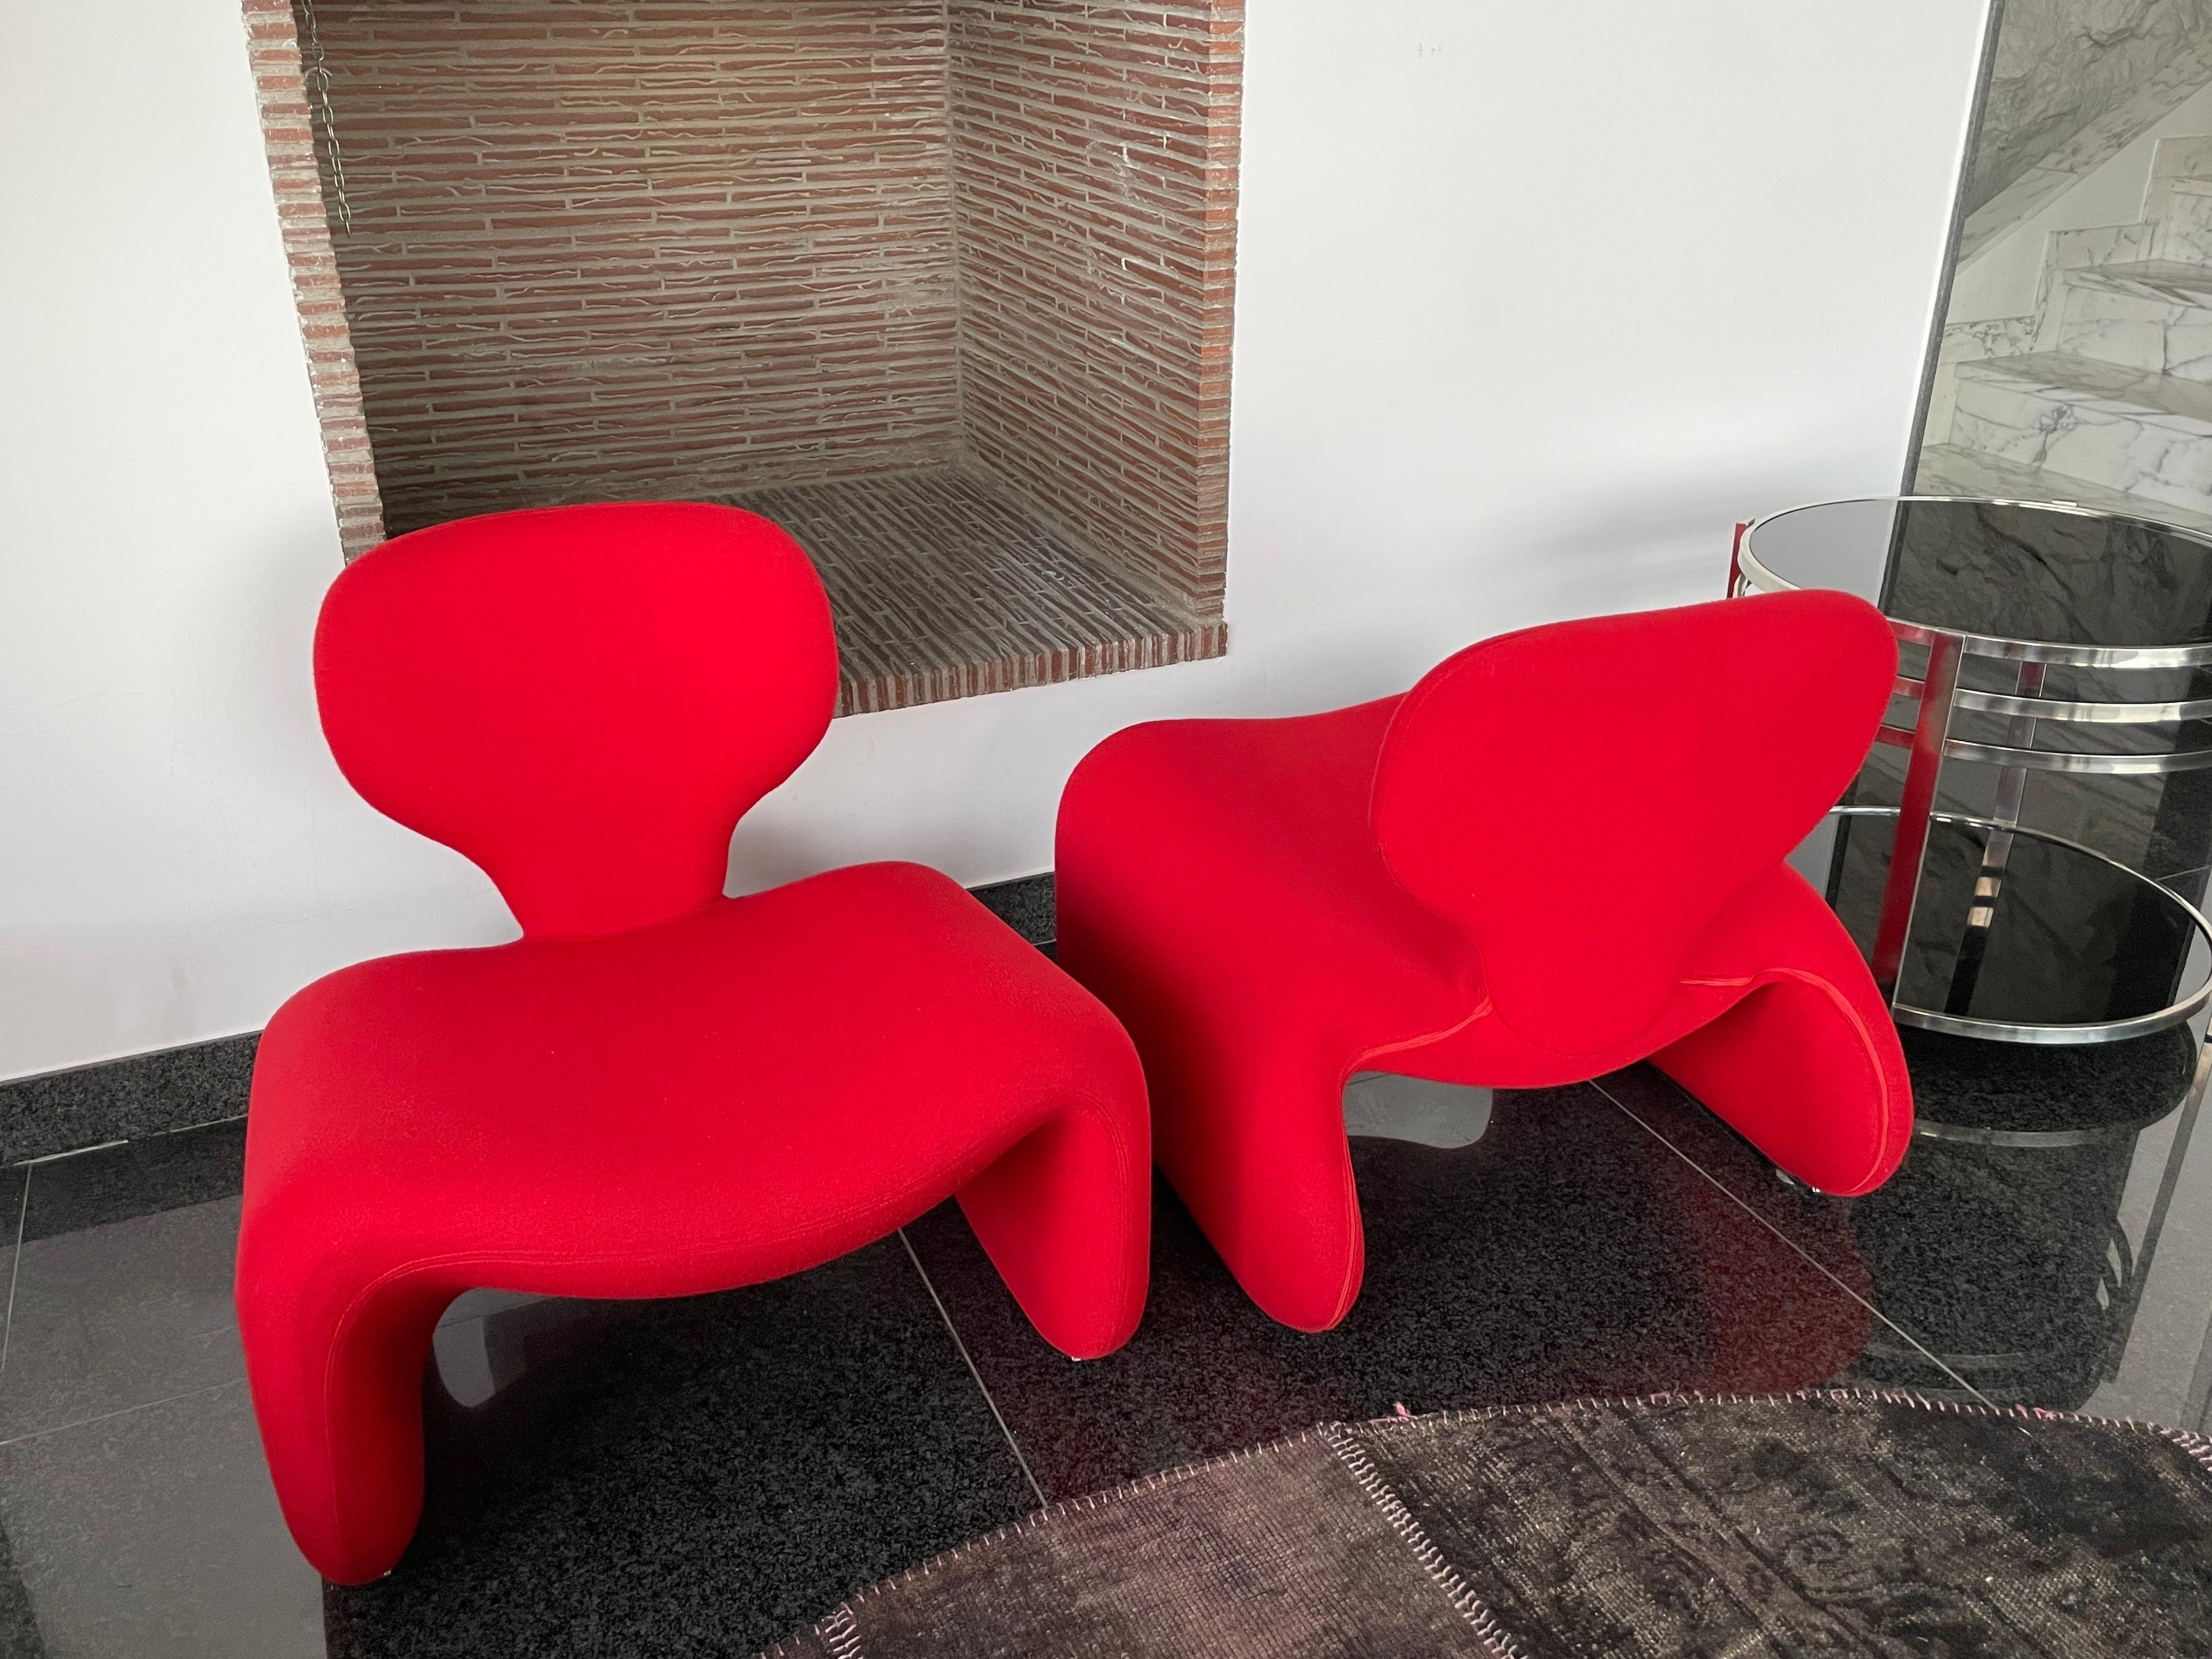 Red vintage Djinn chair, designed by Olivier Mourgue for Airborne International in the 1960s.
The futurist chair became an icon after Stanley Kubrick featured it in his movie « 2001: à space odyssey »

The chair is in excellent condition, with